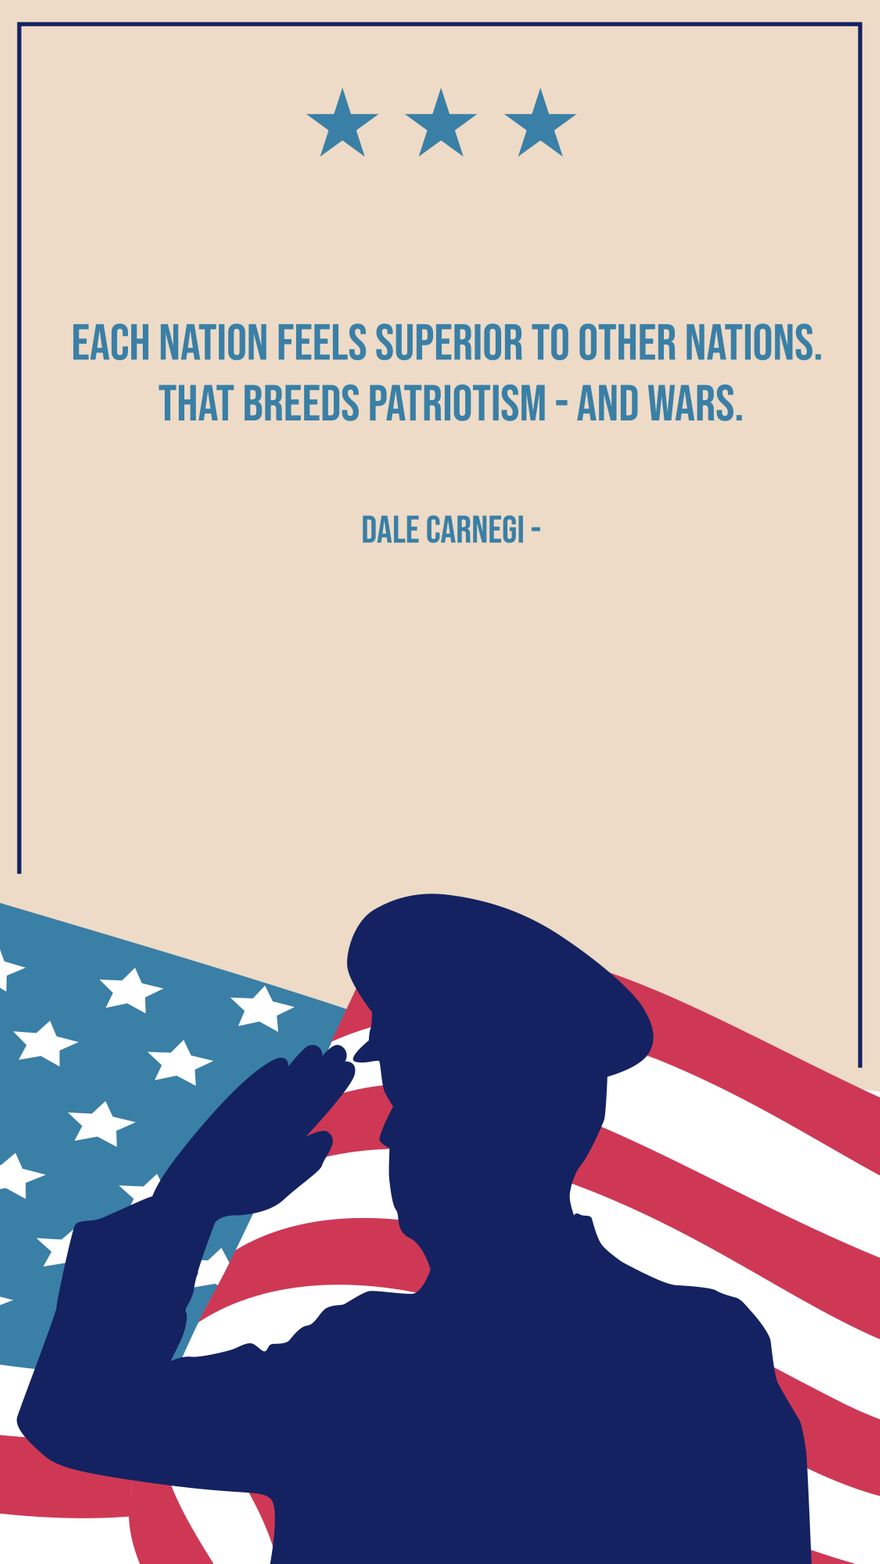 Dale Carnegi - Each nation feels superior to other nations. That breeds patriotism - and wars.